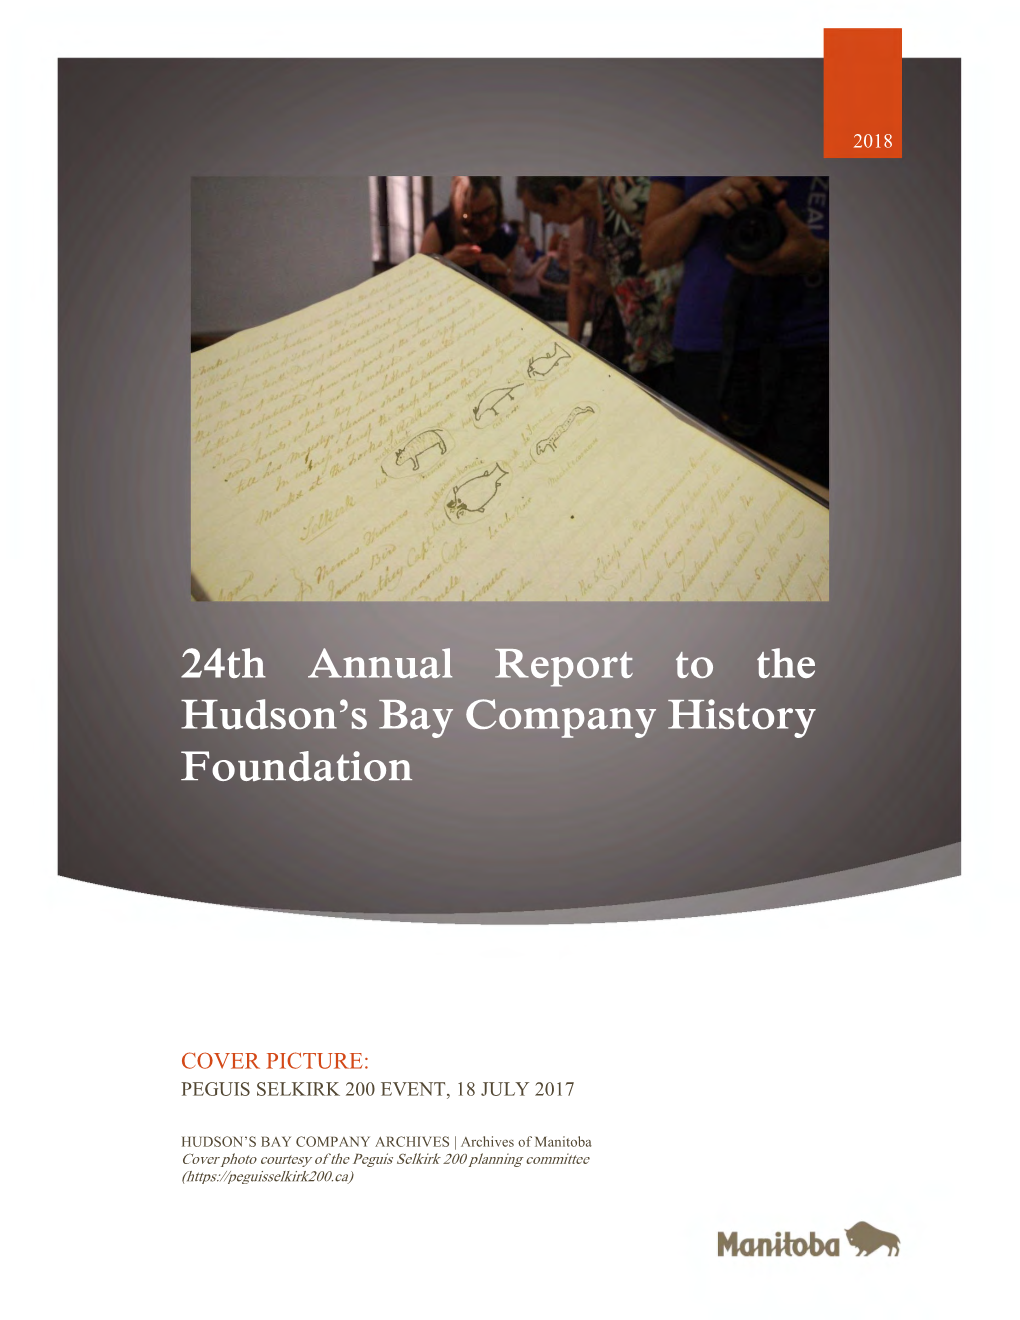 24Th Annual Report to the Hudson's Bay Company History Foundation